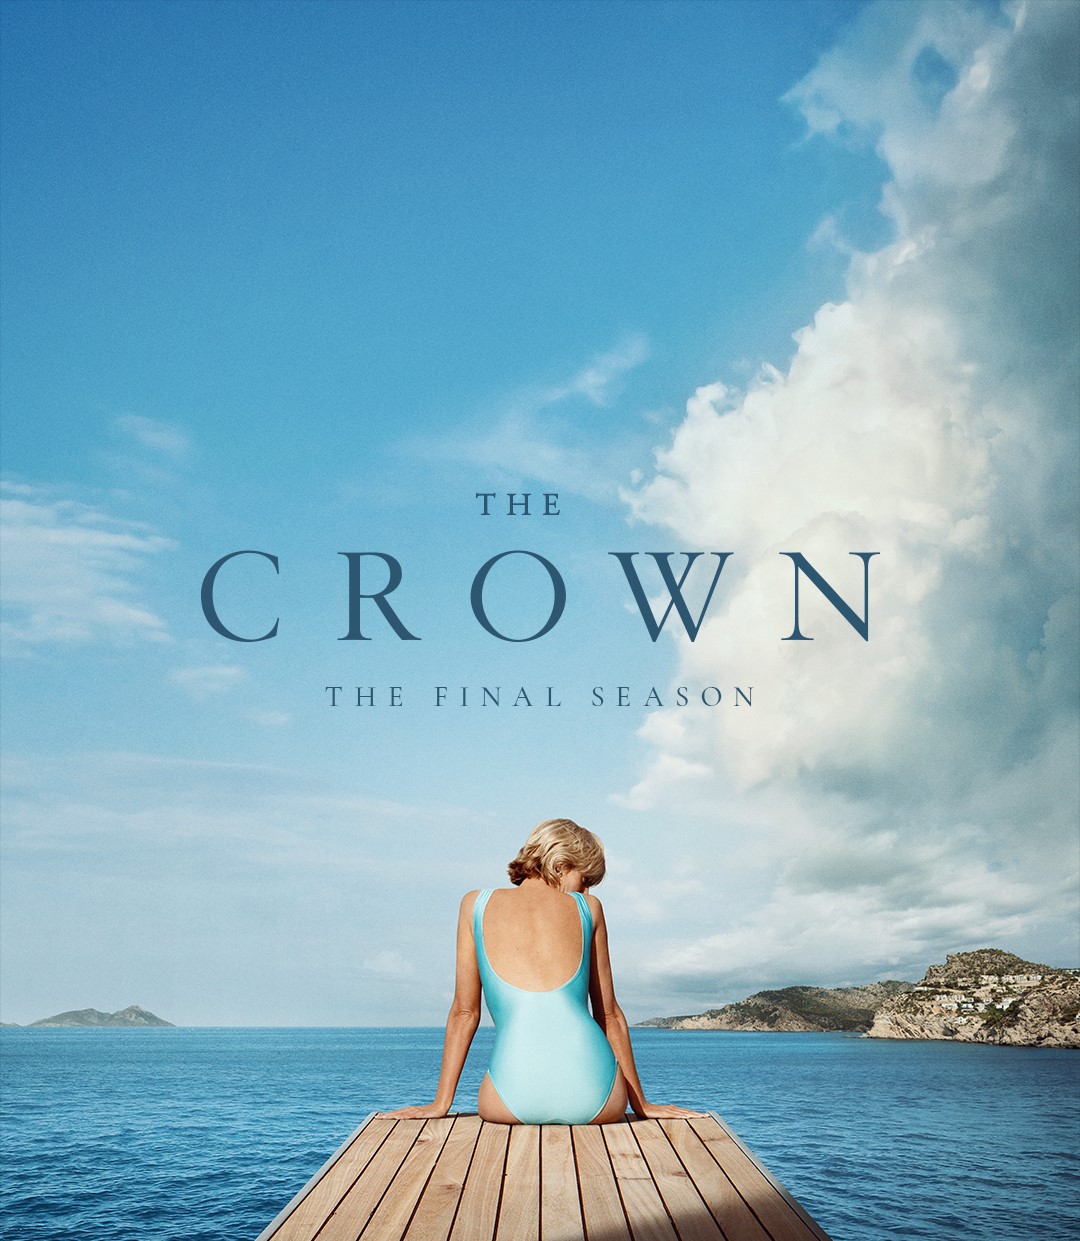 Elizabeth Debicki wearing a blue swimsuit, sitting on a diving board in a poster for The Crown